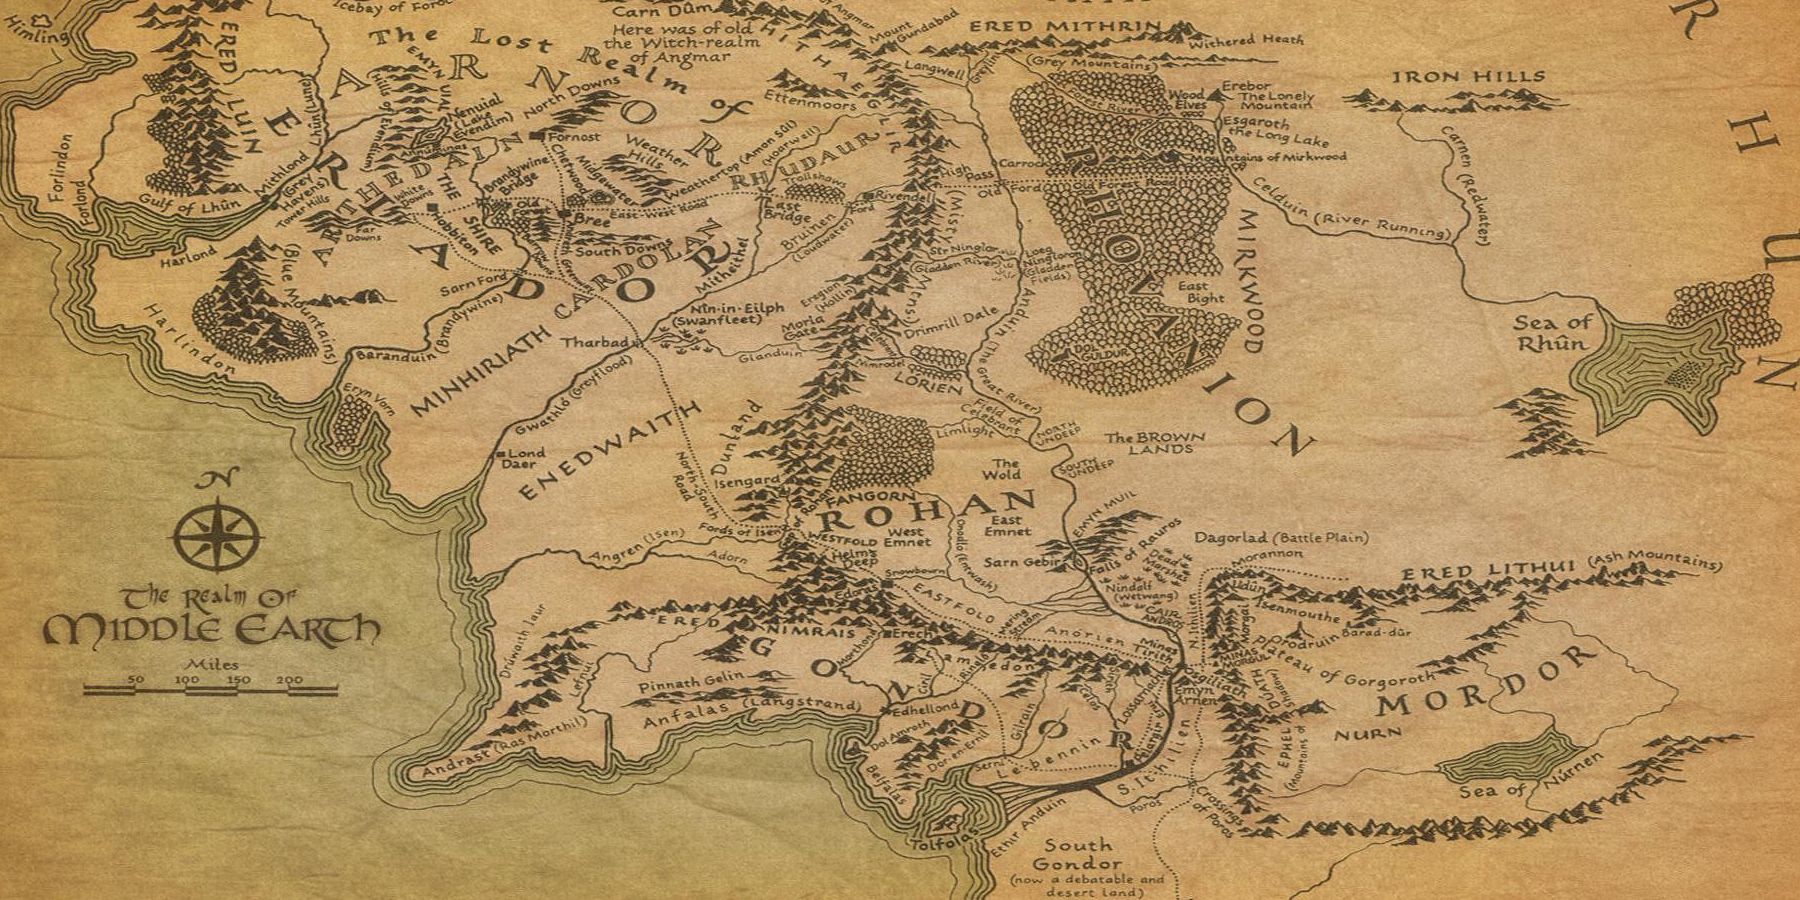 The Misty Mountains on a map of Middle-Earth